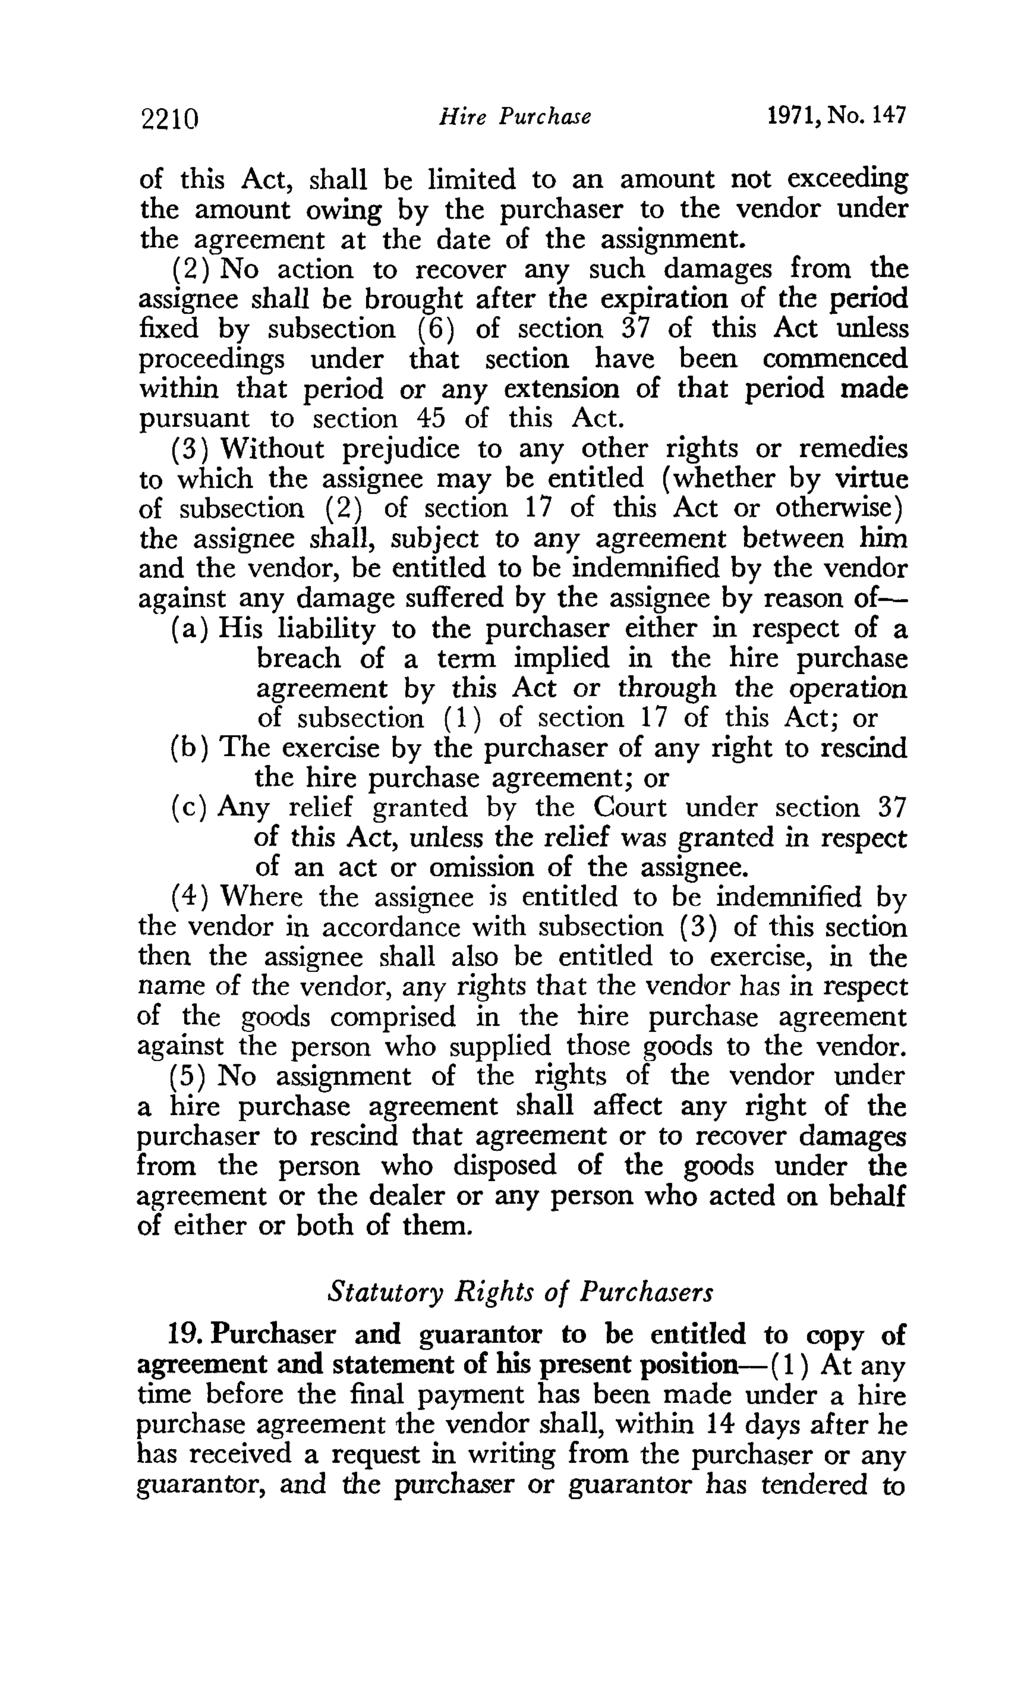 2210 Hire Purchase 1971, No. 147 of this Act, shall be limited to an amount not exceeding the amount owing by the purchaser to the vendor under the agreement at the date of the assignment.